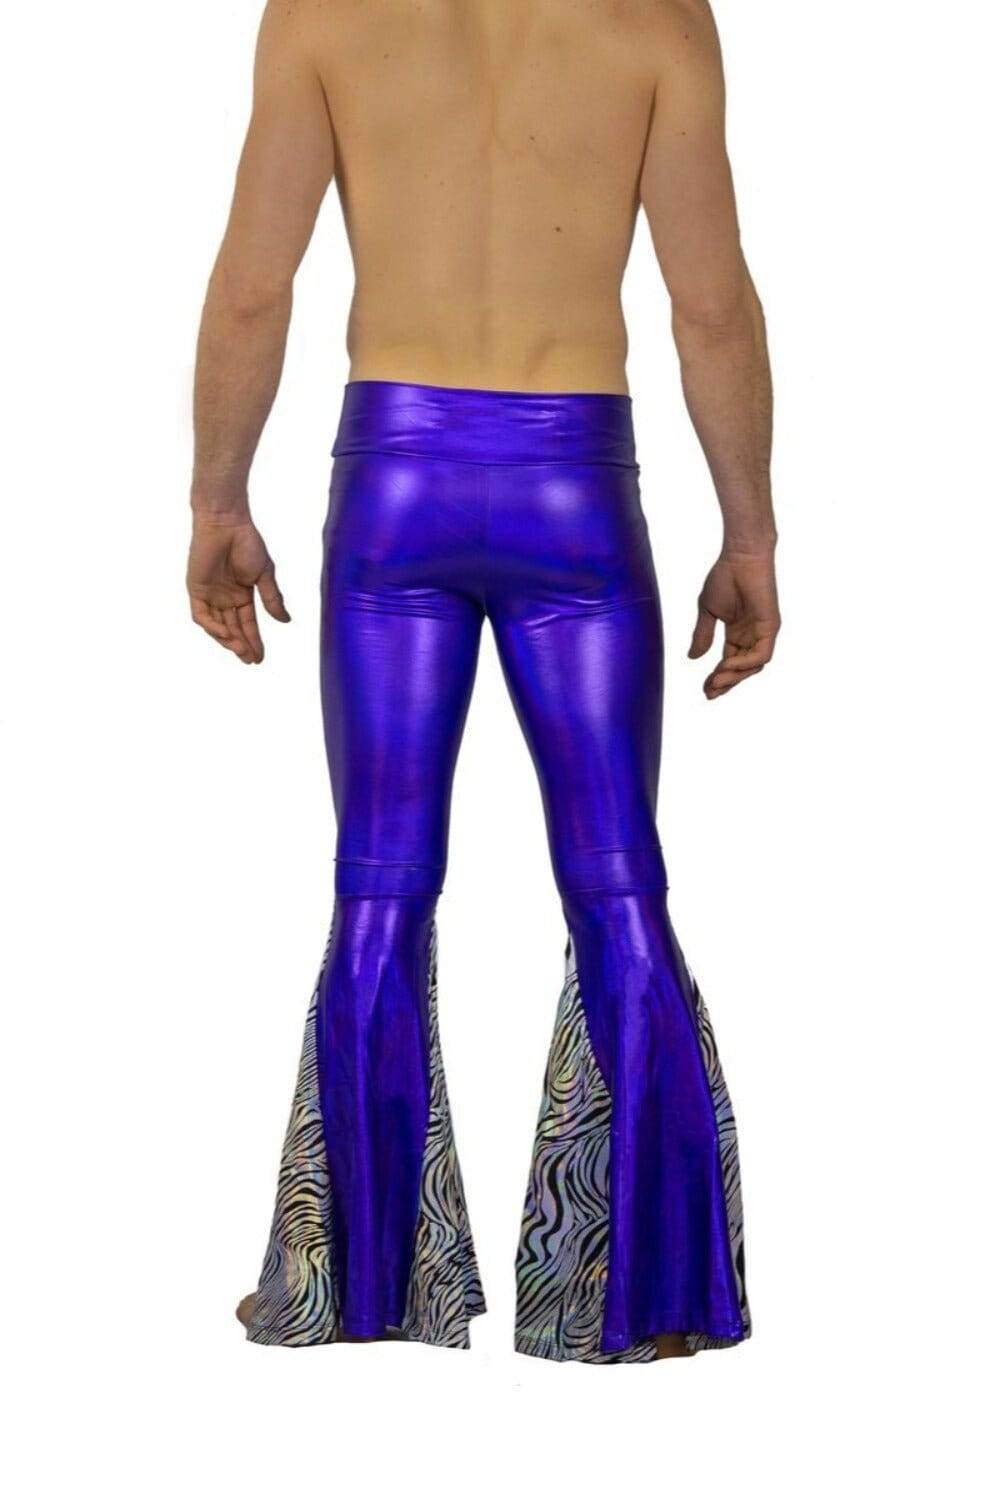 Holographic purple bell bottoms with Zebra print panels by Love Khaos